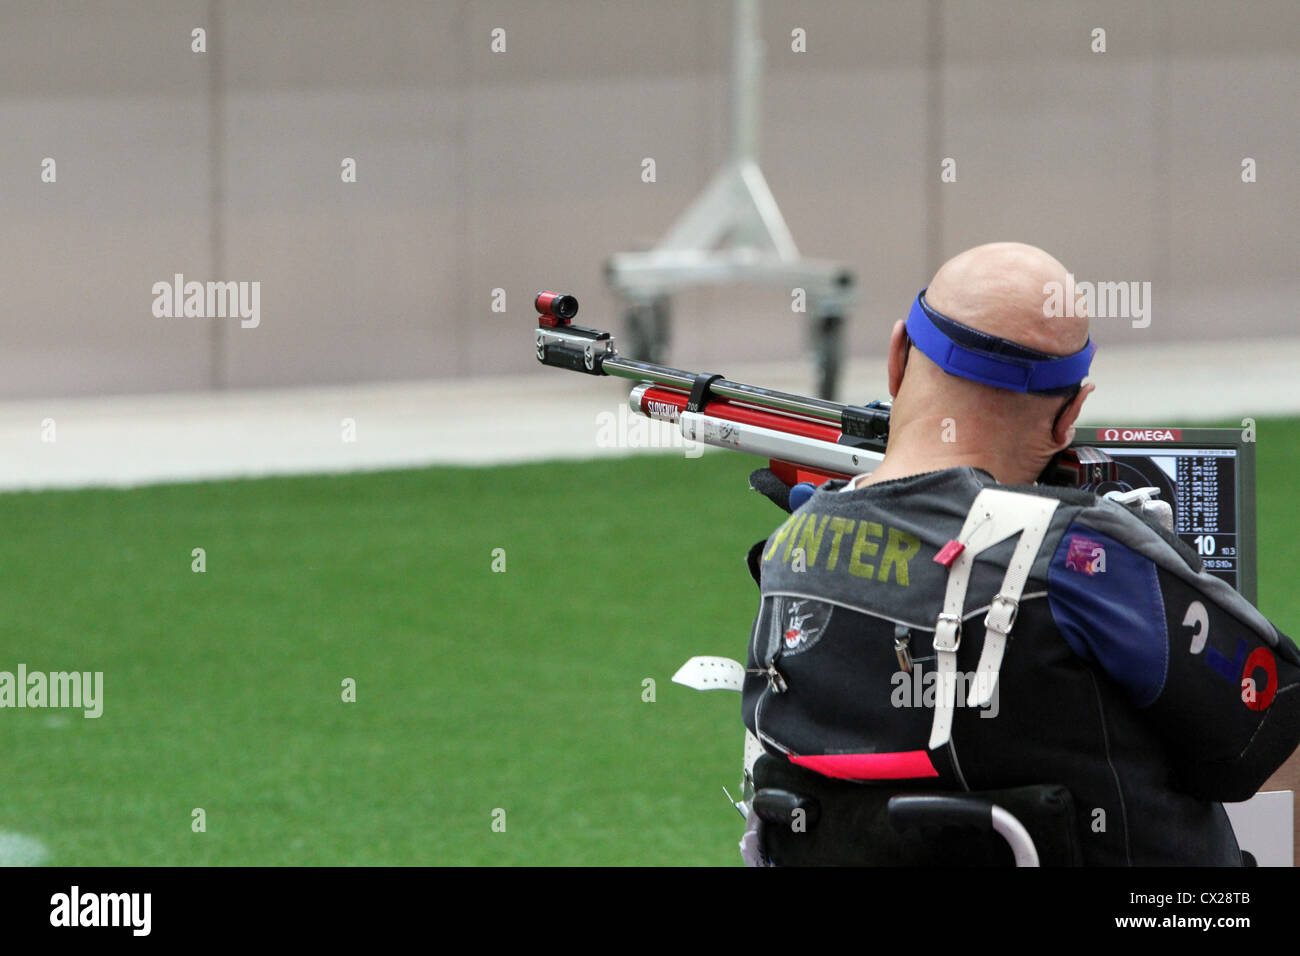 Franc Pinter of Slovenia in the Men's R1-10m Air Rifle Standing SH1 shooting competition at the Royal artillery barracks Stock Photo